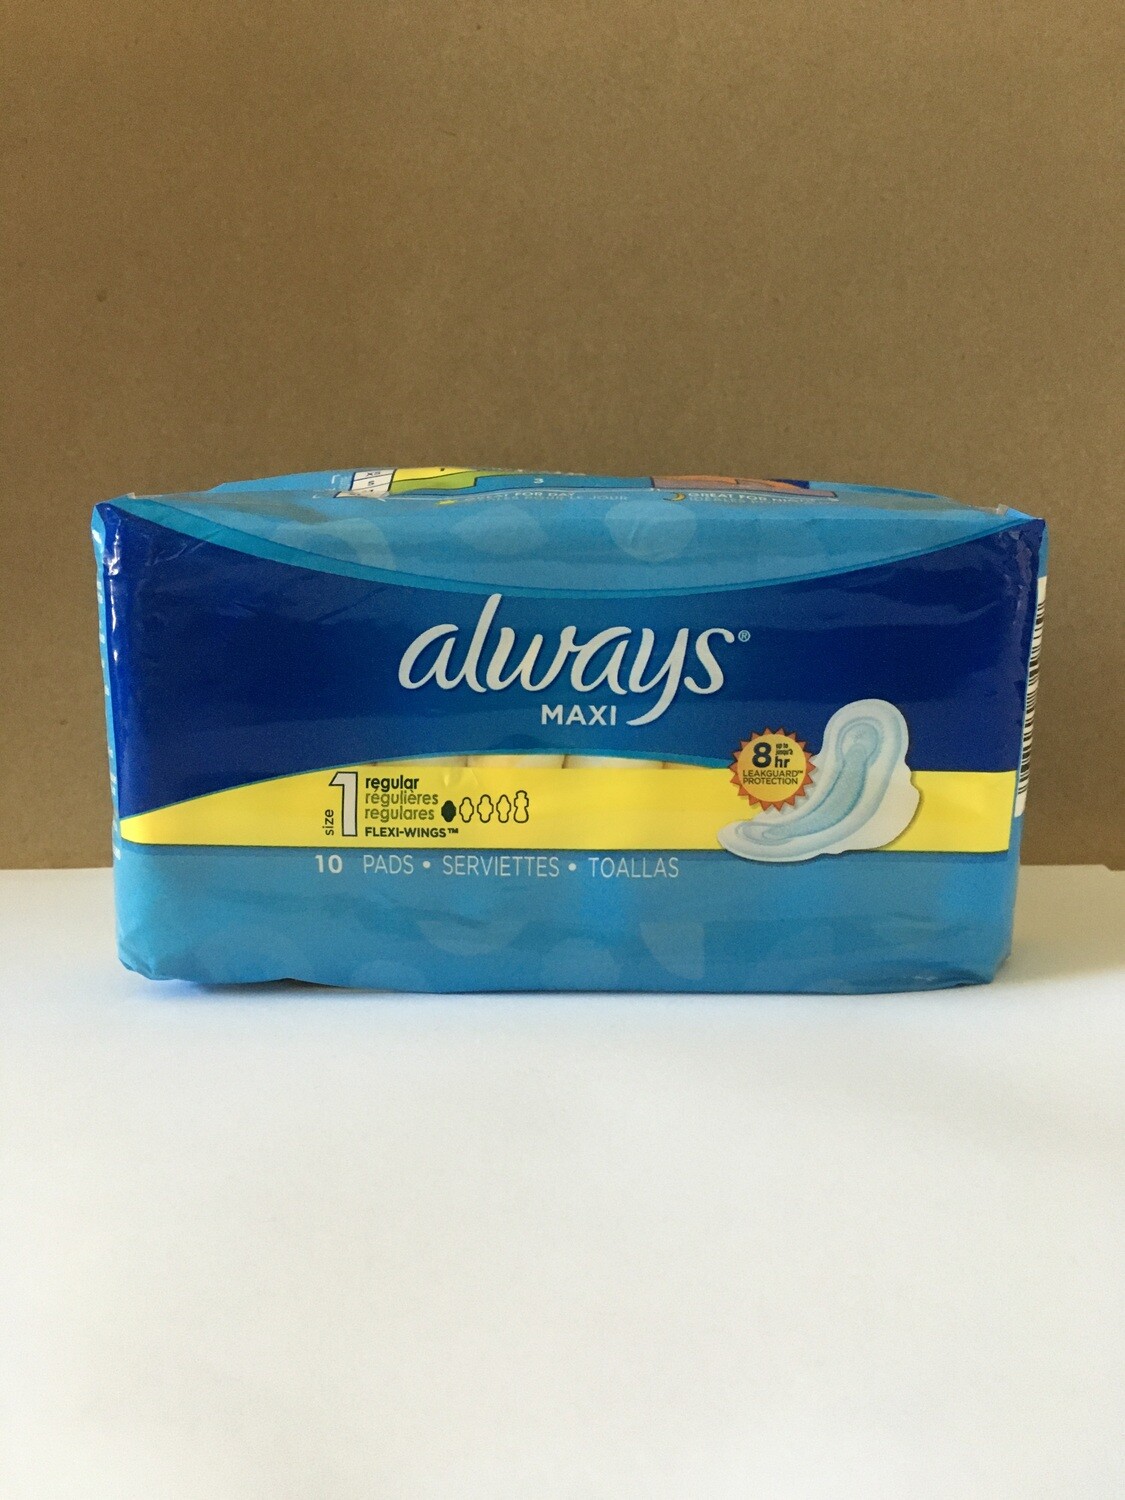 Health and Beauty / Feminine Products / Always Maxi 10 ct